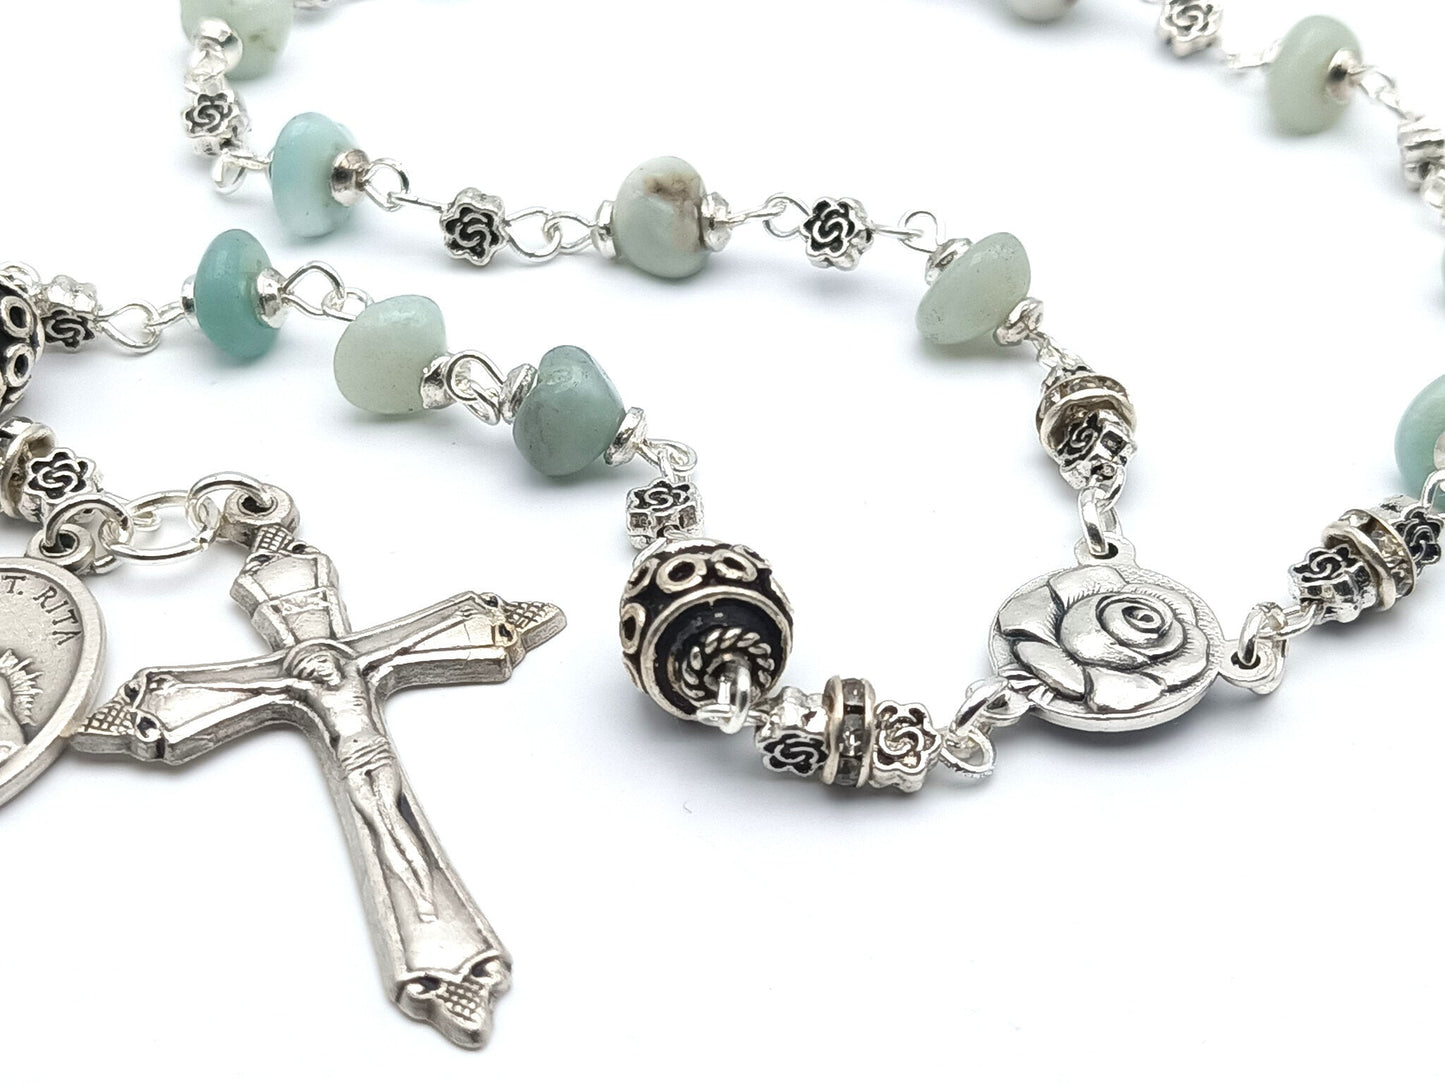 Saint Rita unique rosary beads single decade or tenner rosary with agate gemstone beads, silver pater beads, Holy Angels crucifix and Saint Rita medal.